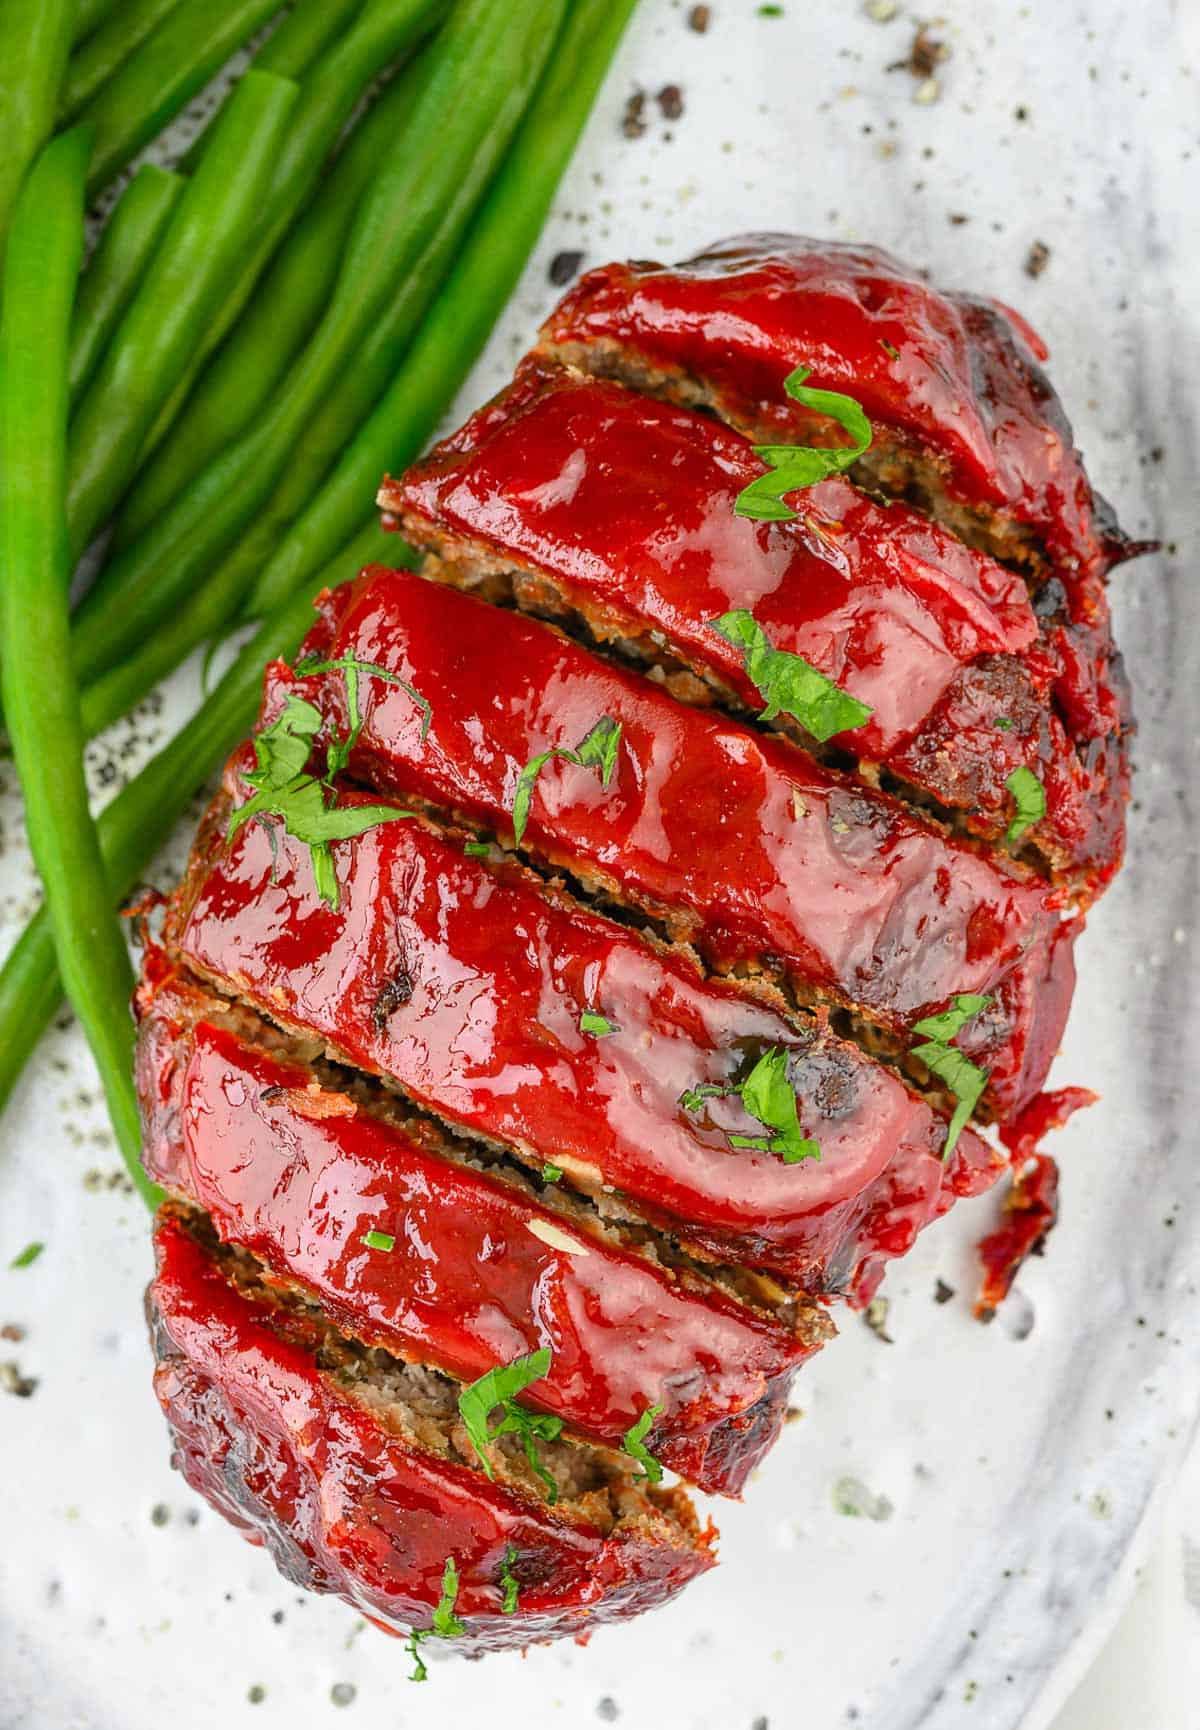 Sliced Air Fryer Meatloaf / Make homemade meatloaf in the air fryer, it has the perfect texture and flavor. Easy cooking and cleanup! #airfryermeatloaf #recipe #recipe #easy #airfryer #best #groundbeef